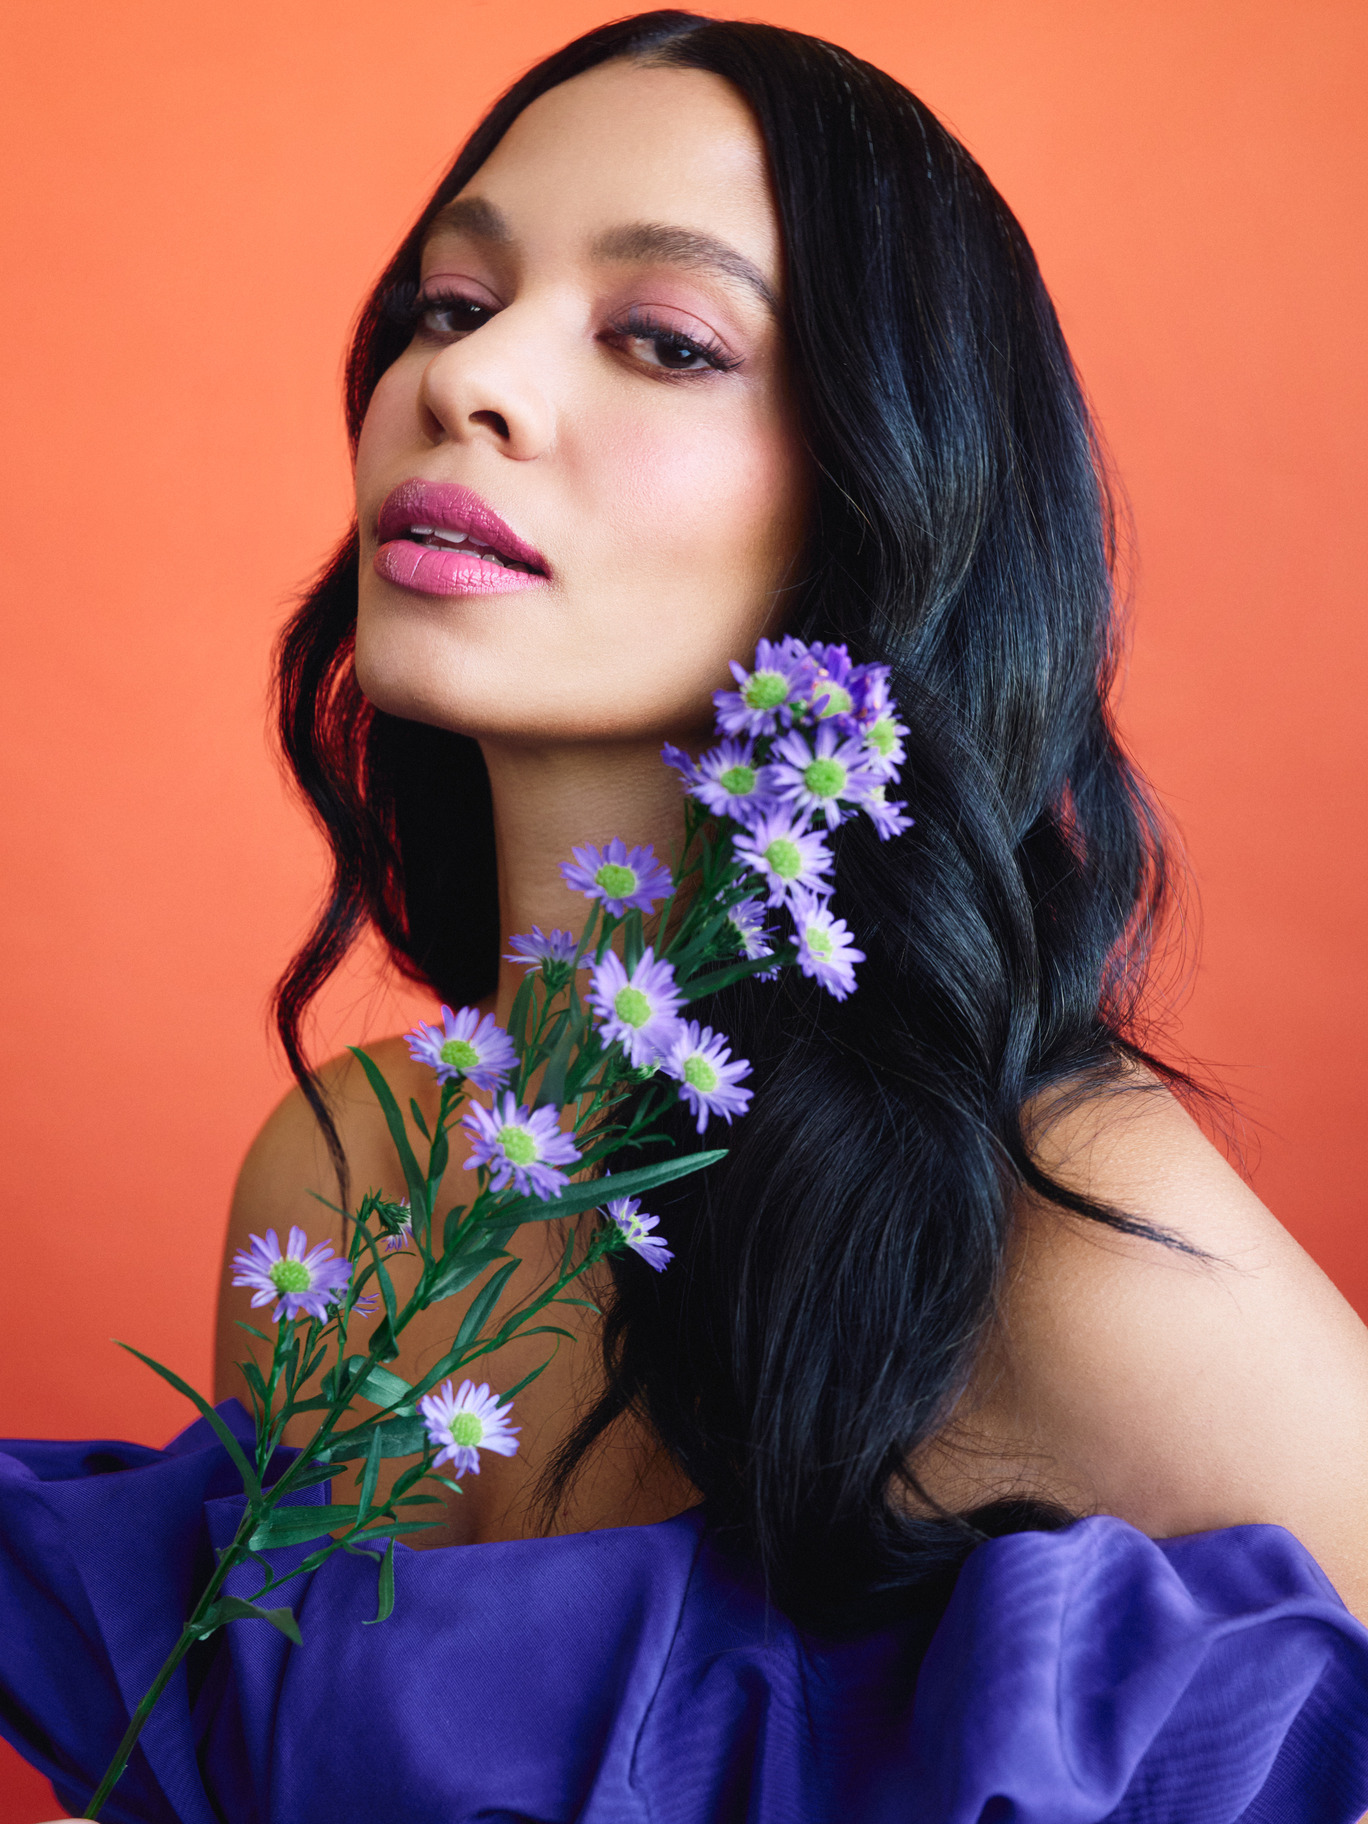 Aurora James is wearing an off the shoulder violet dress. Her hair is down and head is tilted looking into the camera. A bushel of lavender paper flowers frames her face. She is against an orange background.